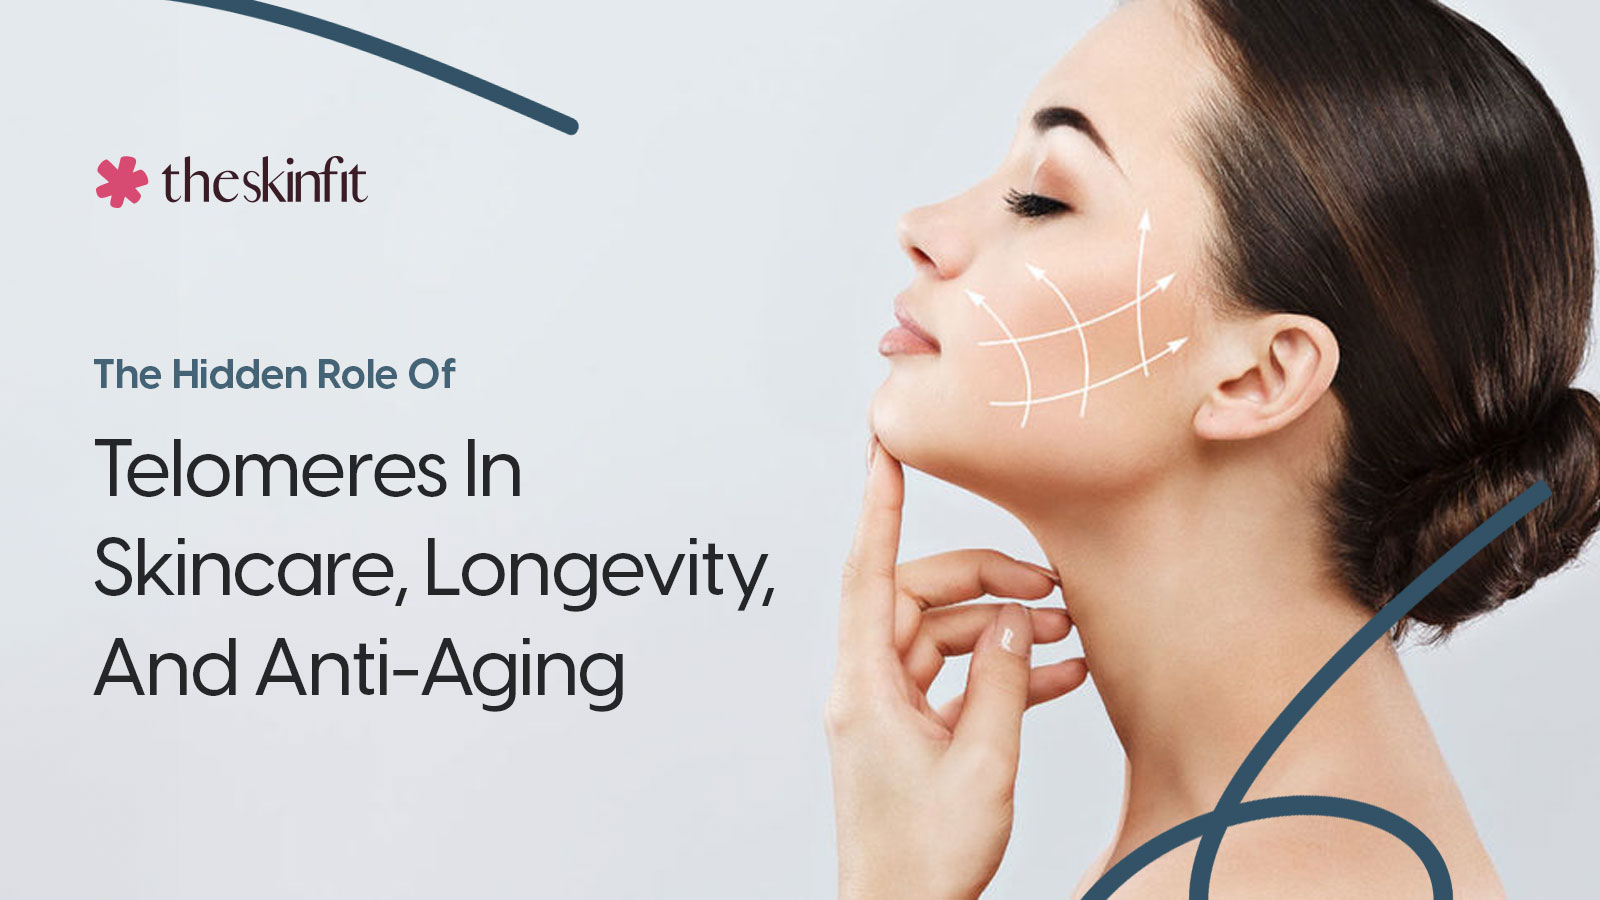 The Hidden Role Of Telomeres In Skincare, Longevity, And Anti-Aging 